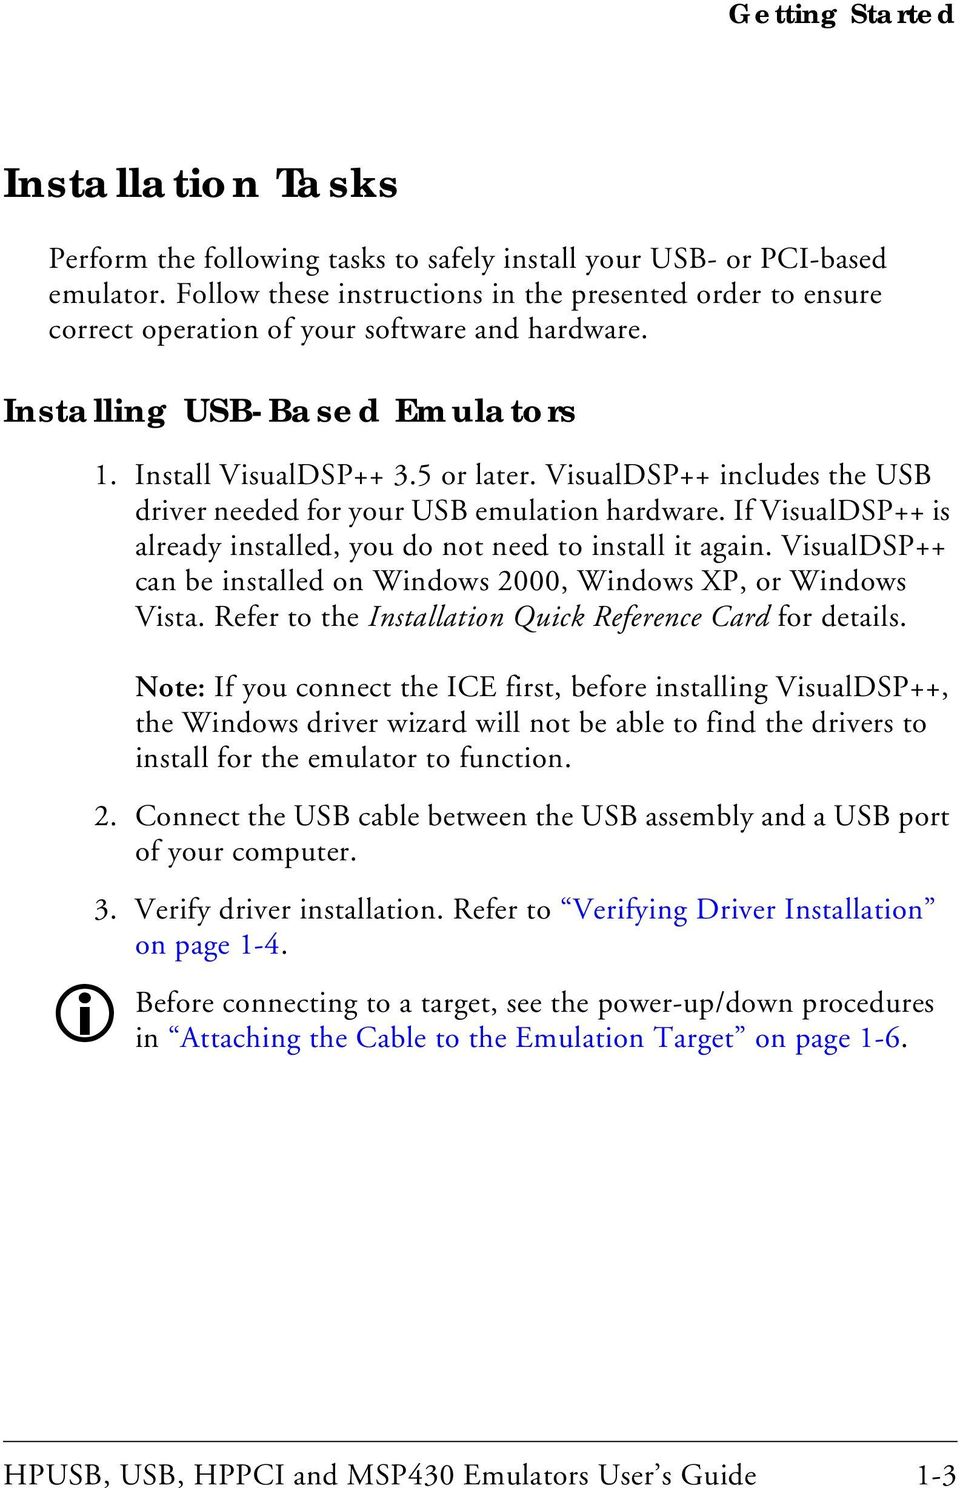 VisualDSP++ includes the USB driver needed for your USB emulation hardware. If VisualDSP++ is already installed, you do not need to install it again.